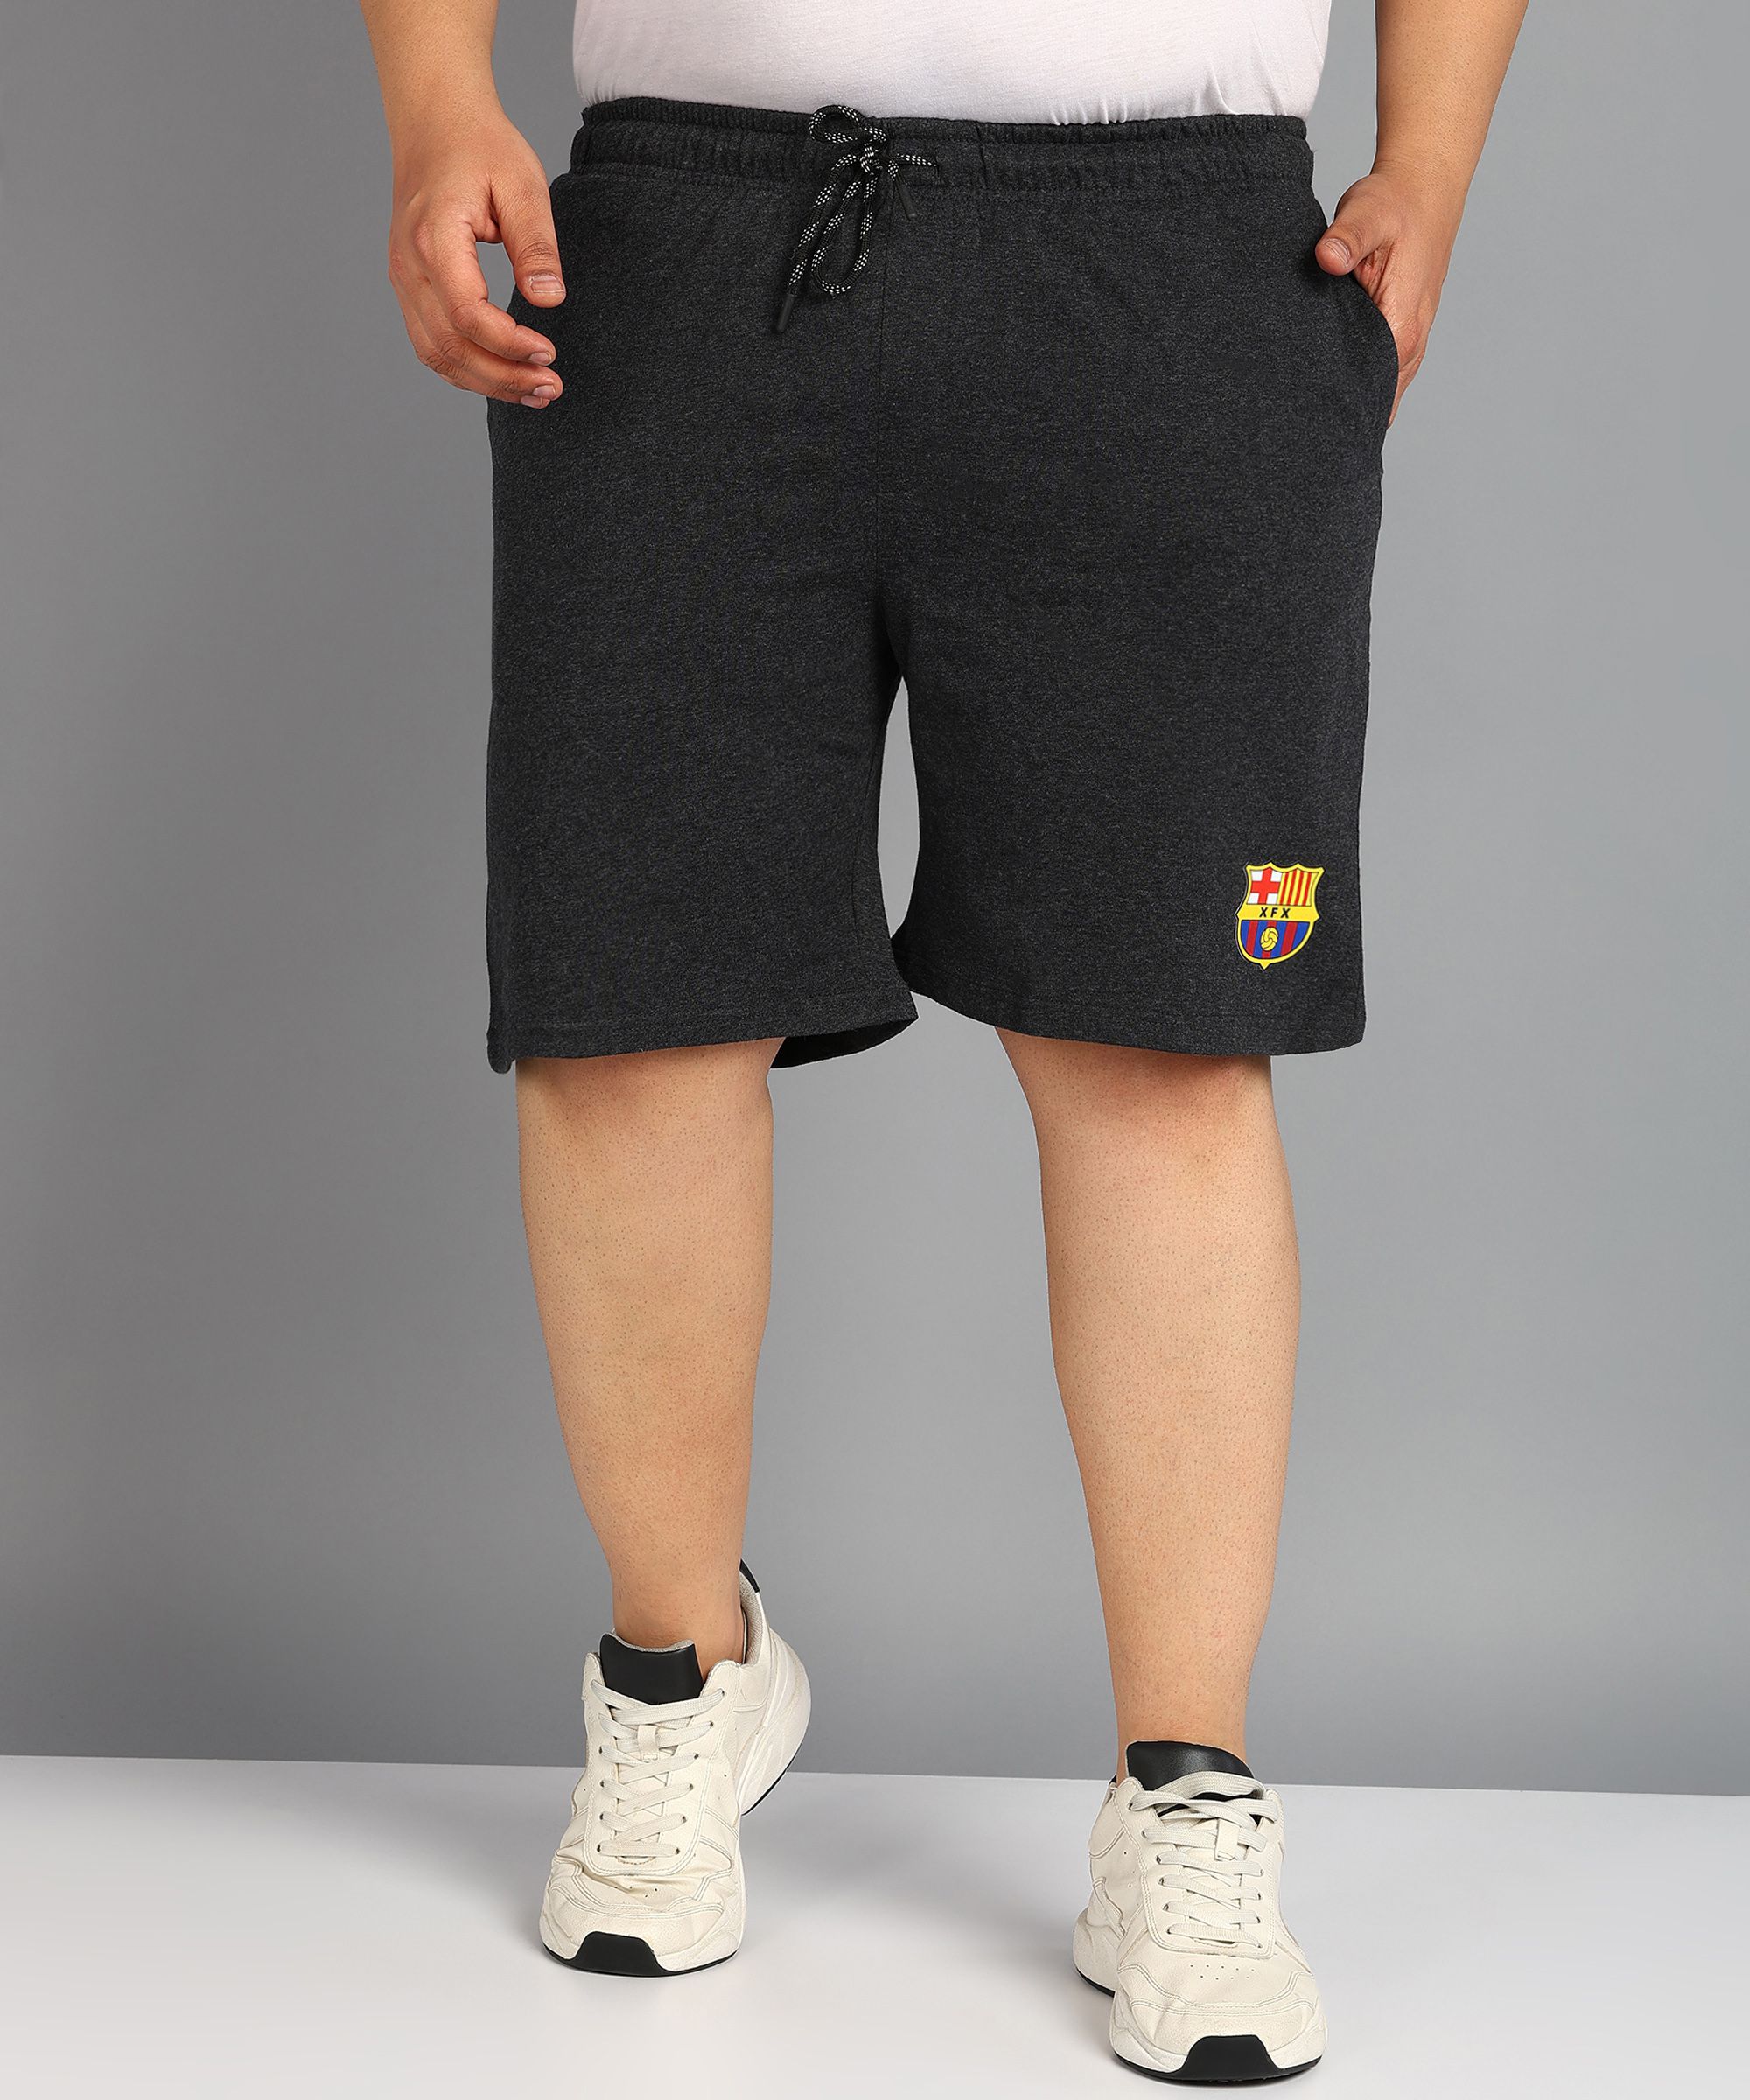     			XFOX Charcoal Blended Men's Shorts ( Pack of 1 )